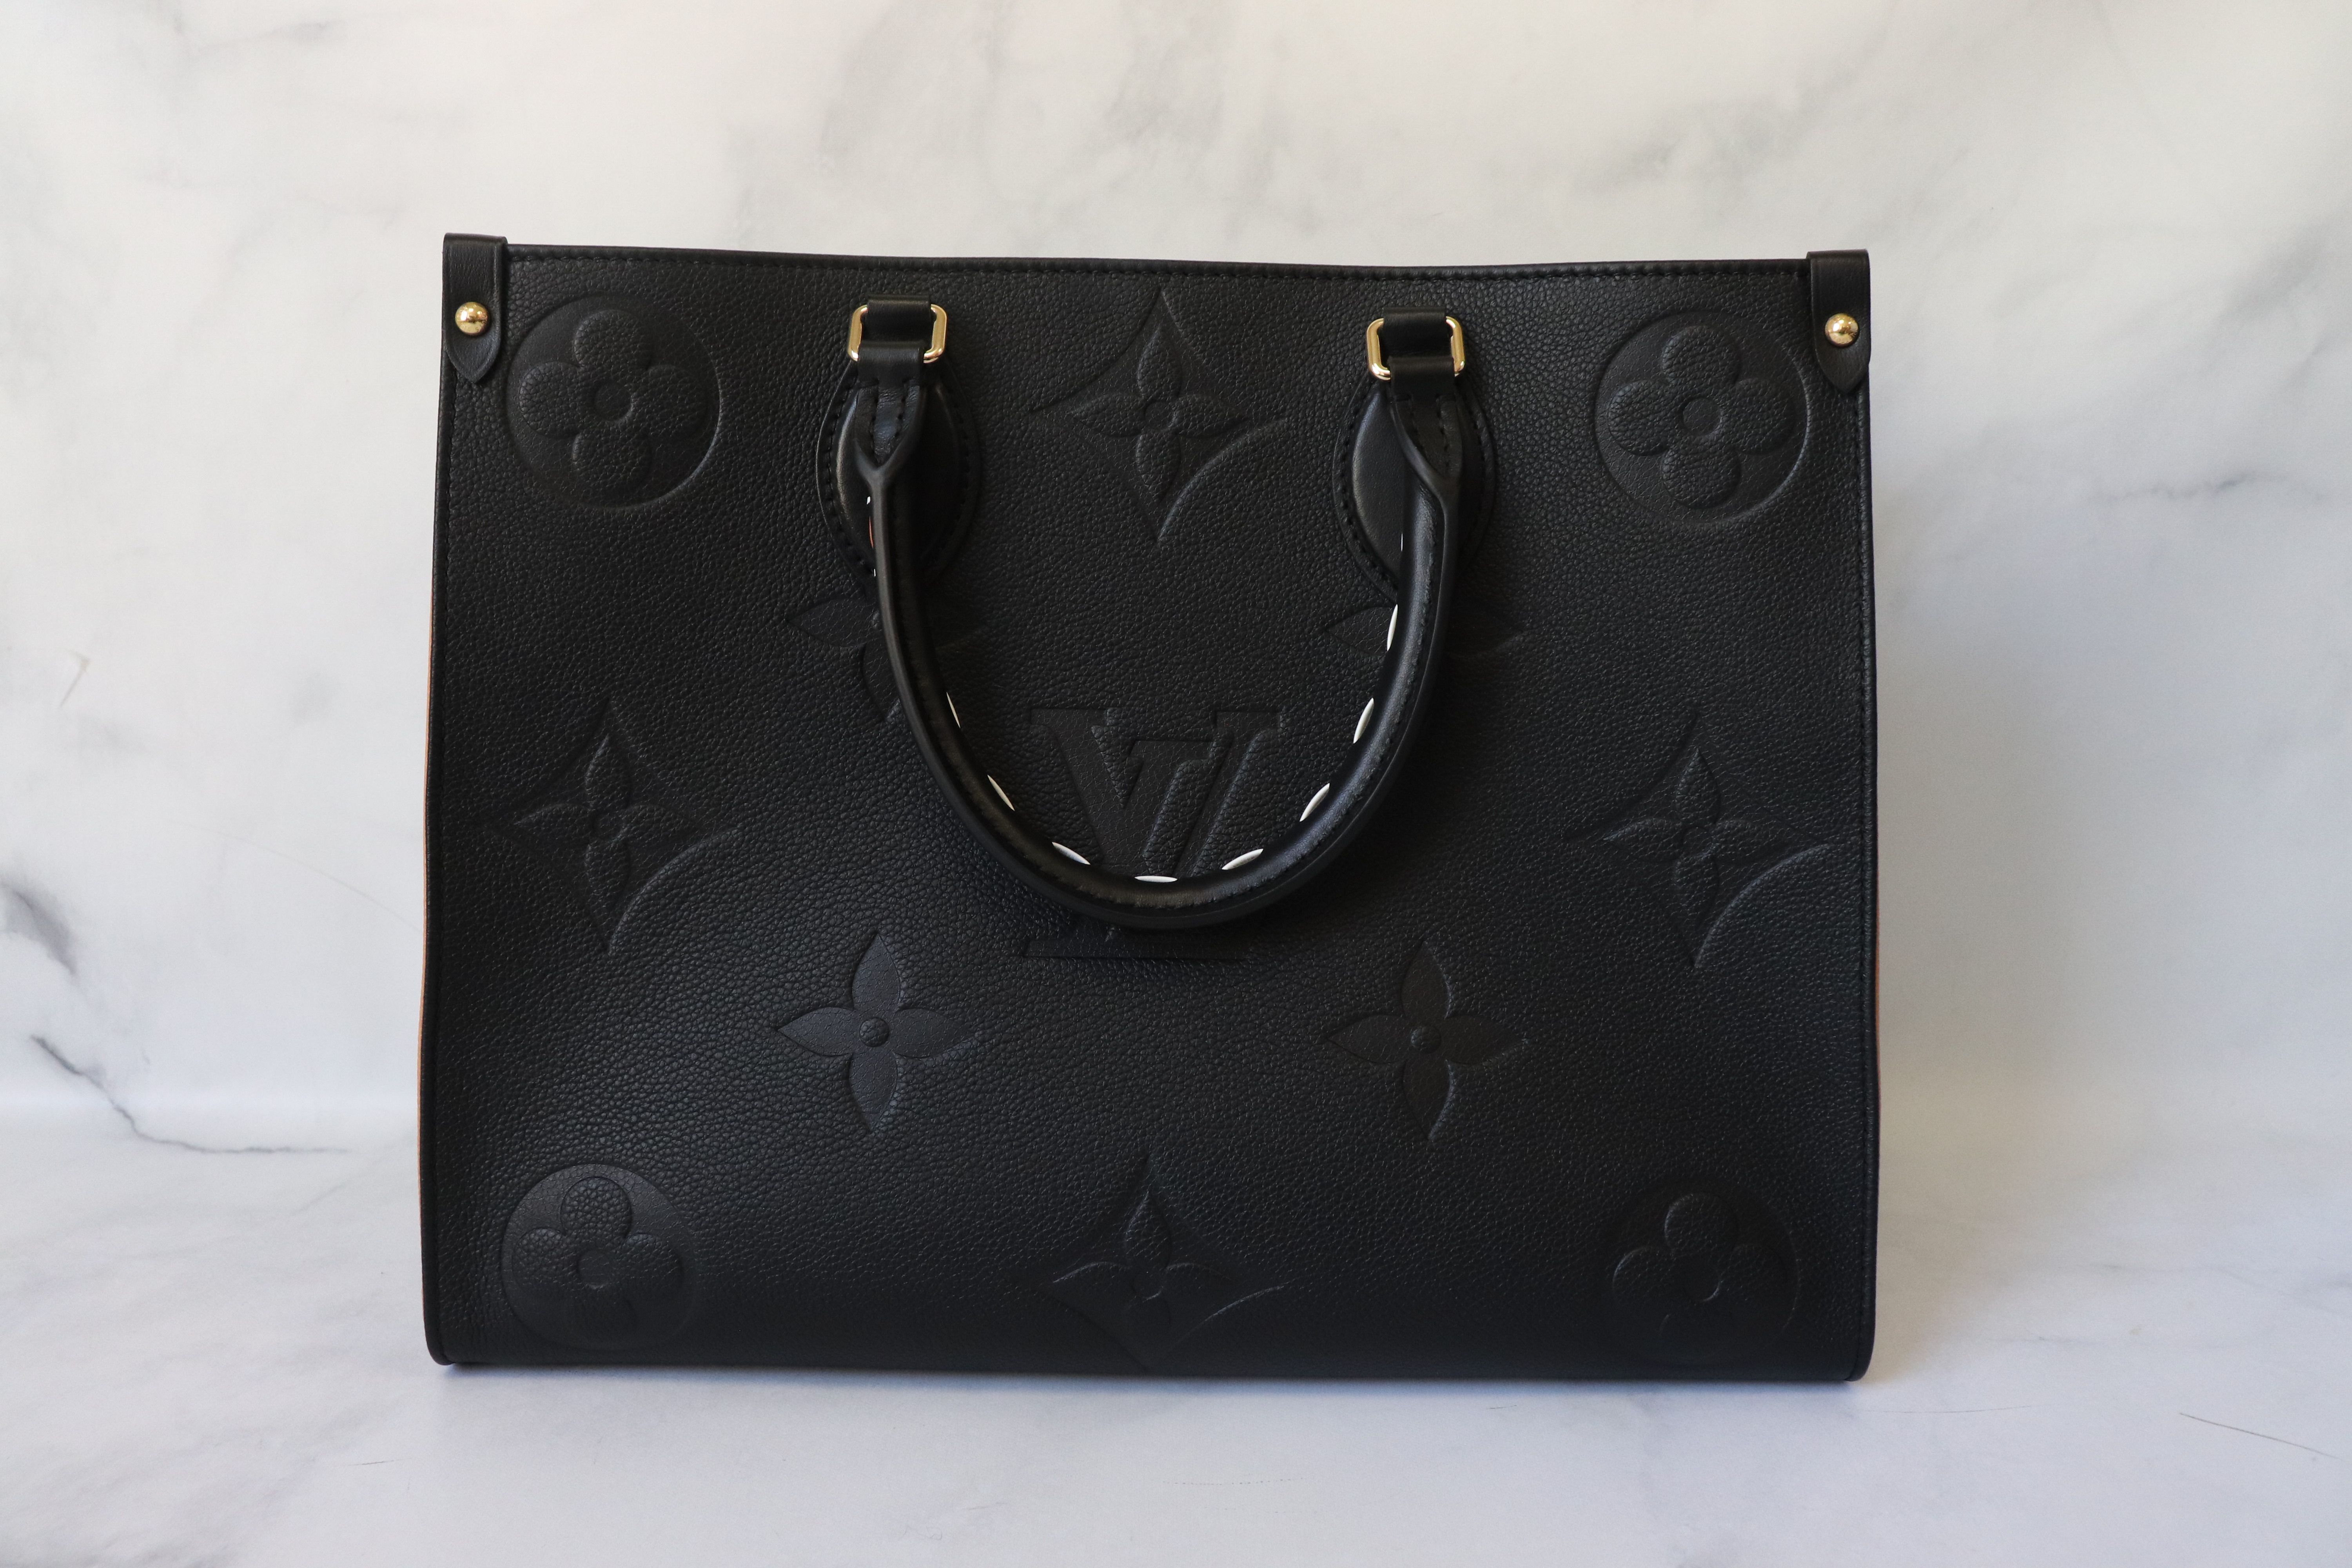 Louis Vuitton On the Go MM, Noir Leather, Wild at Heart Collection, New in  Dustbag - Julia Rose Boston